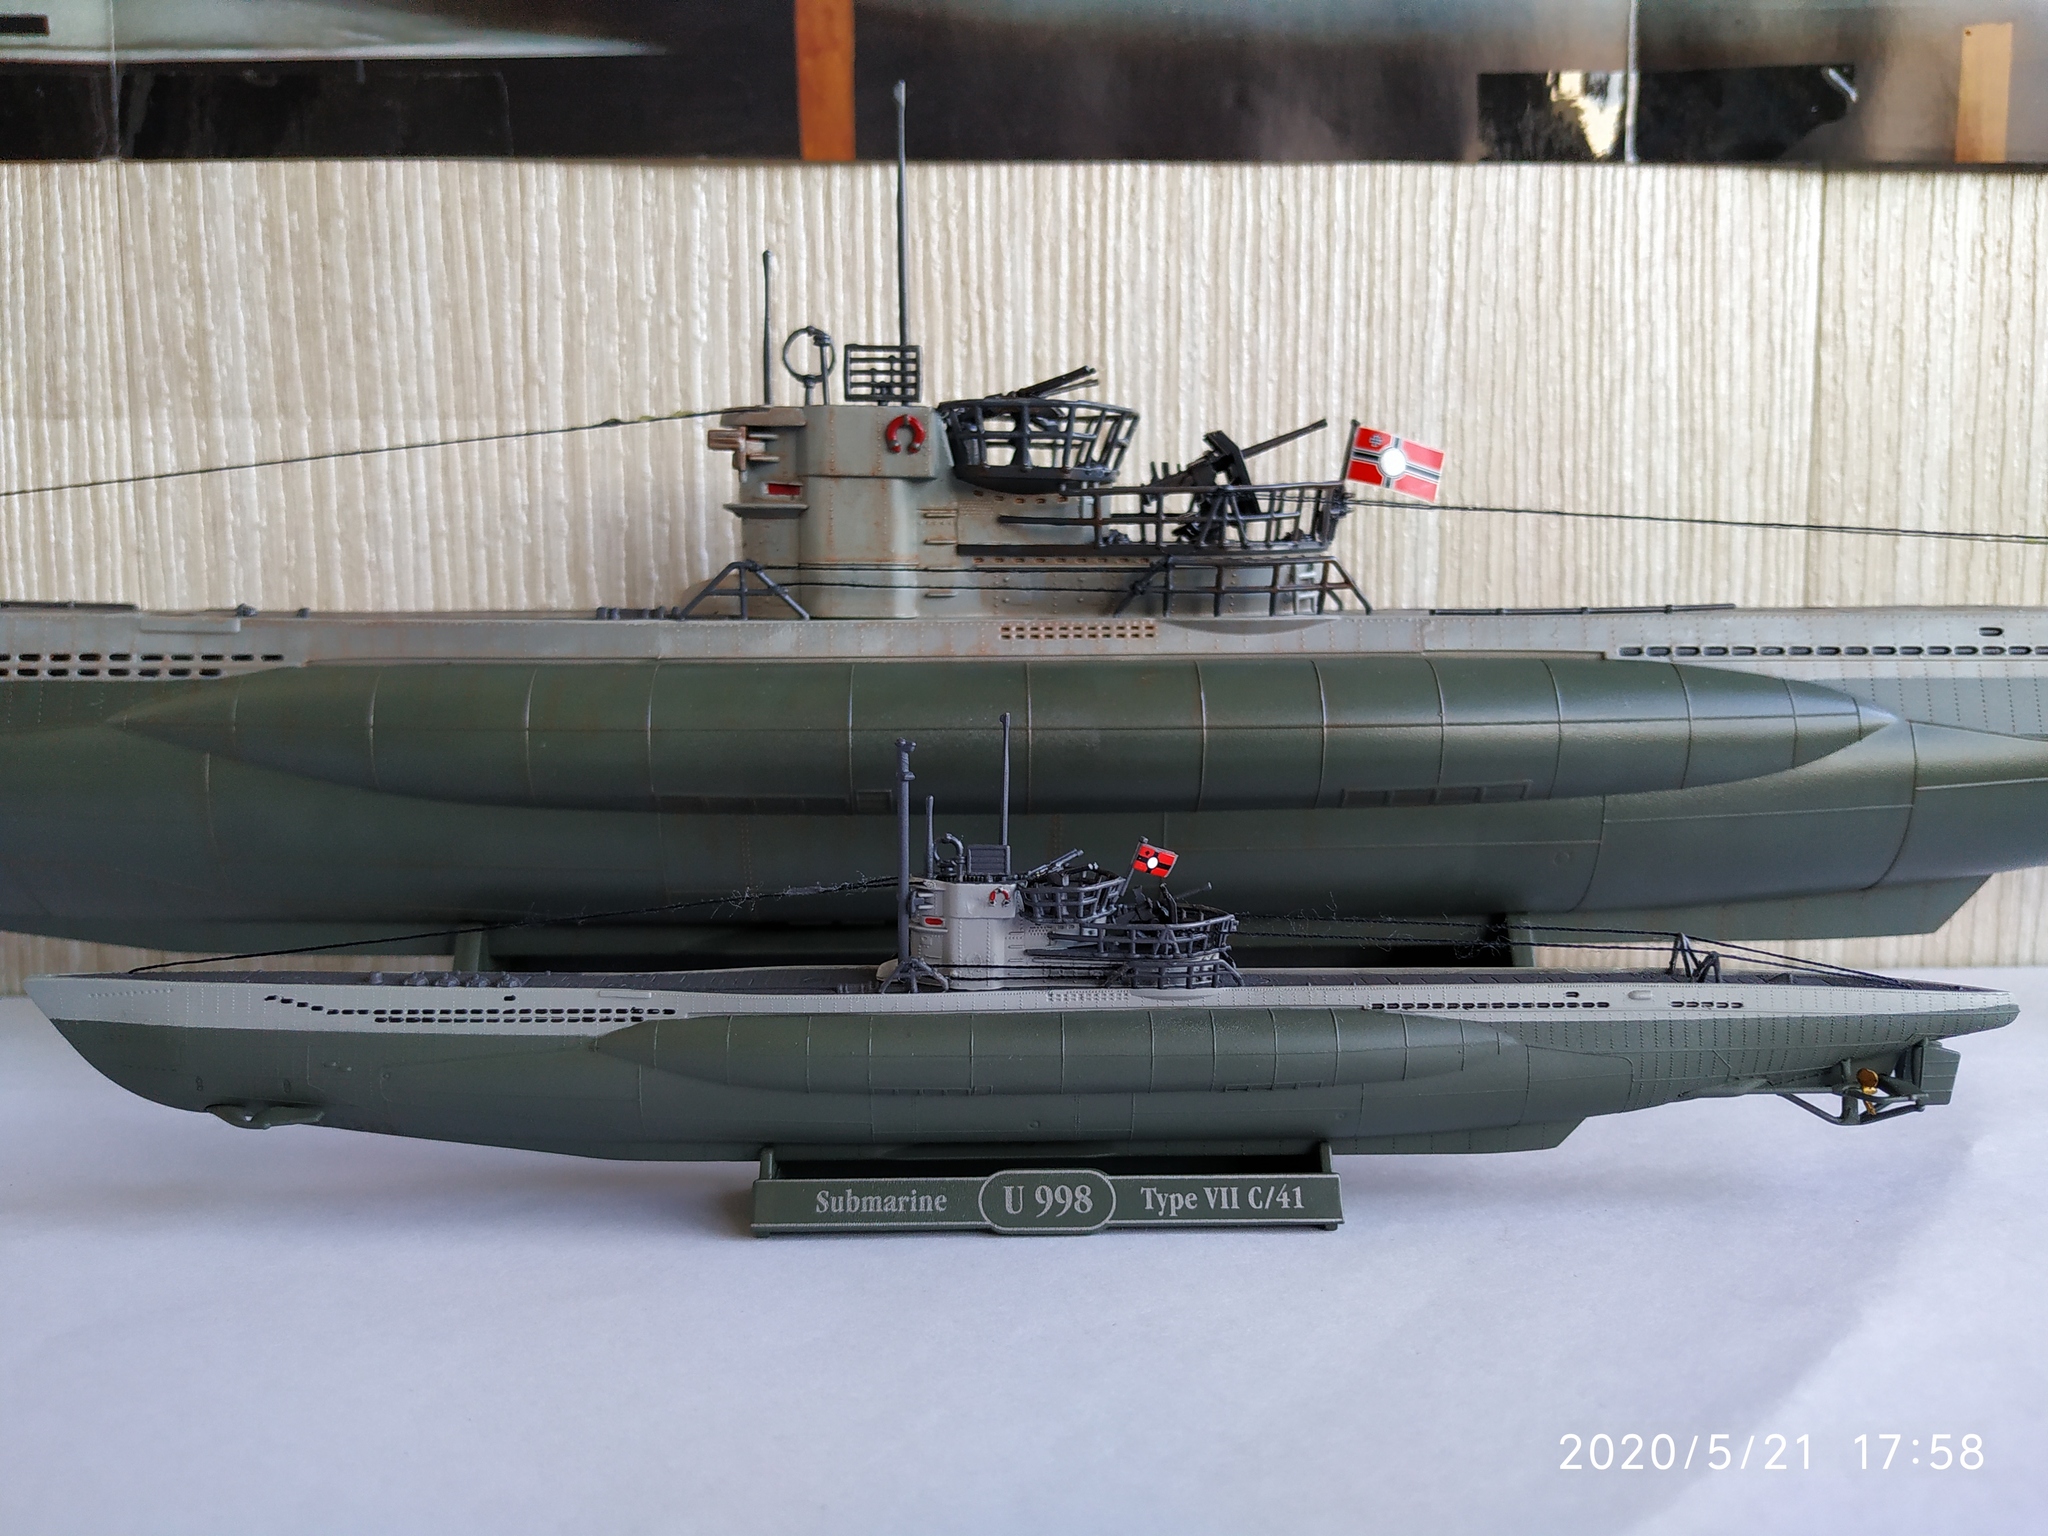 Models of German submarines of the 7th series from Rewell in scales 1:144 & 1:350 - Scale model, Modeling, Stand modeling, Ship modeling, Revell, Longpost